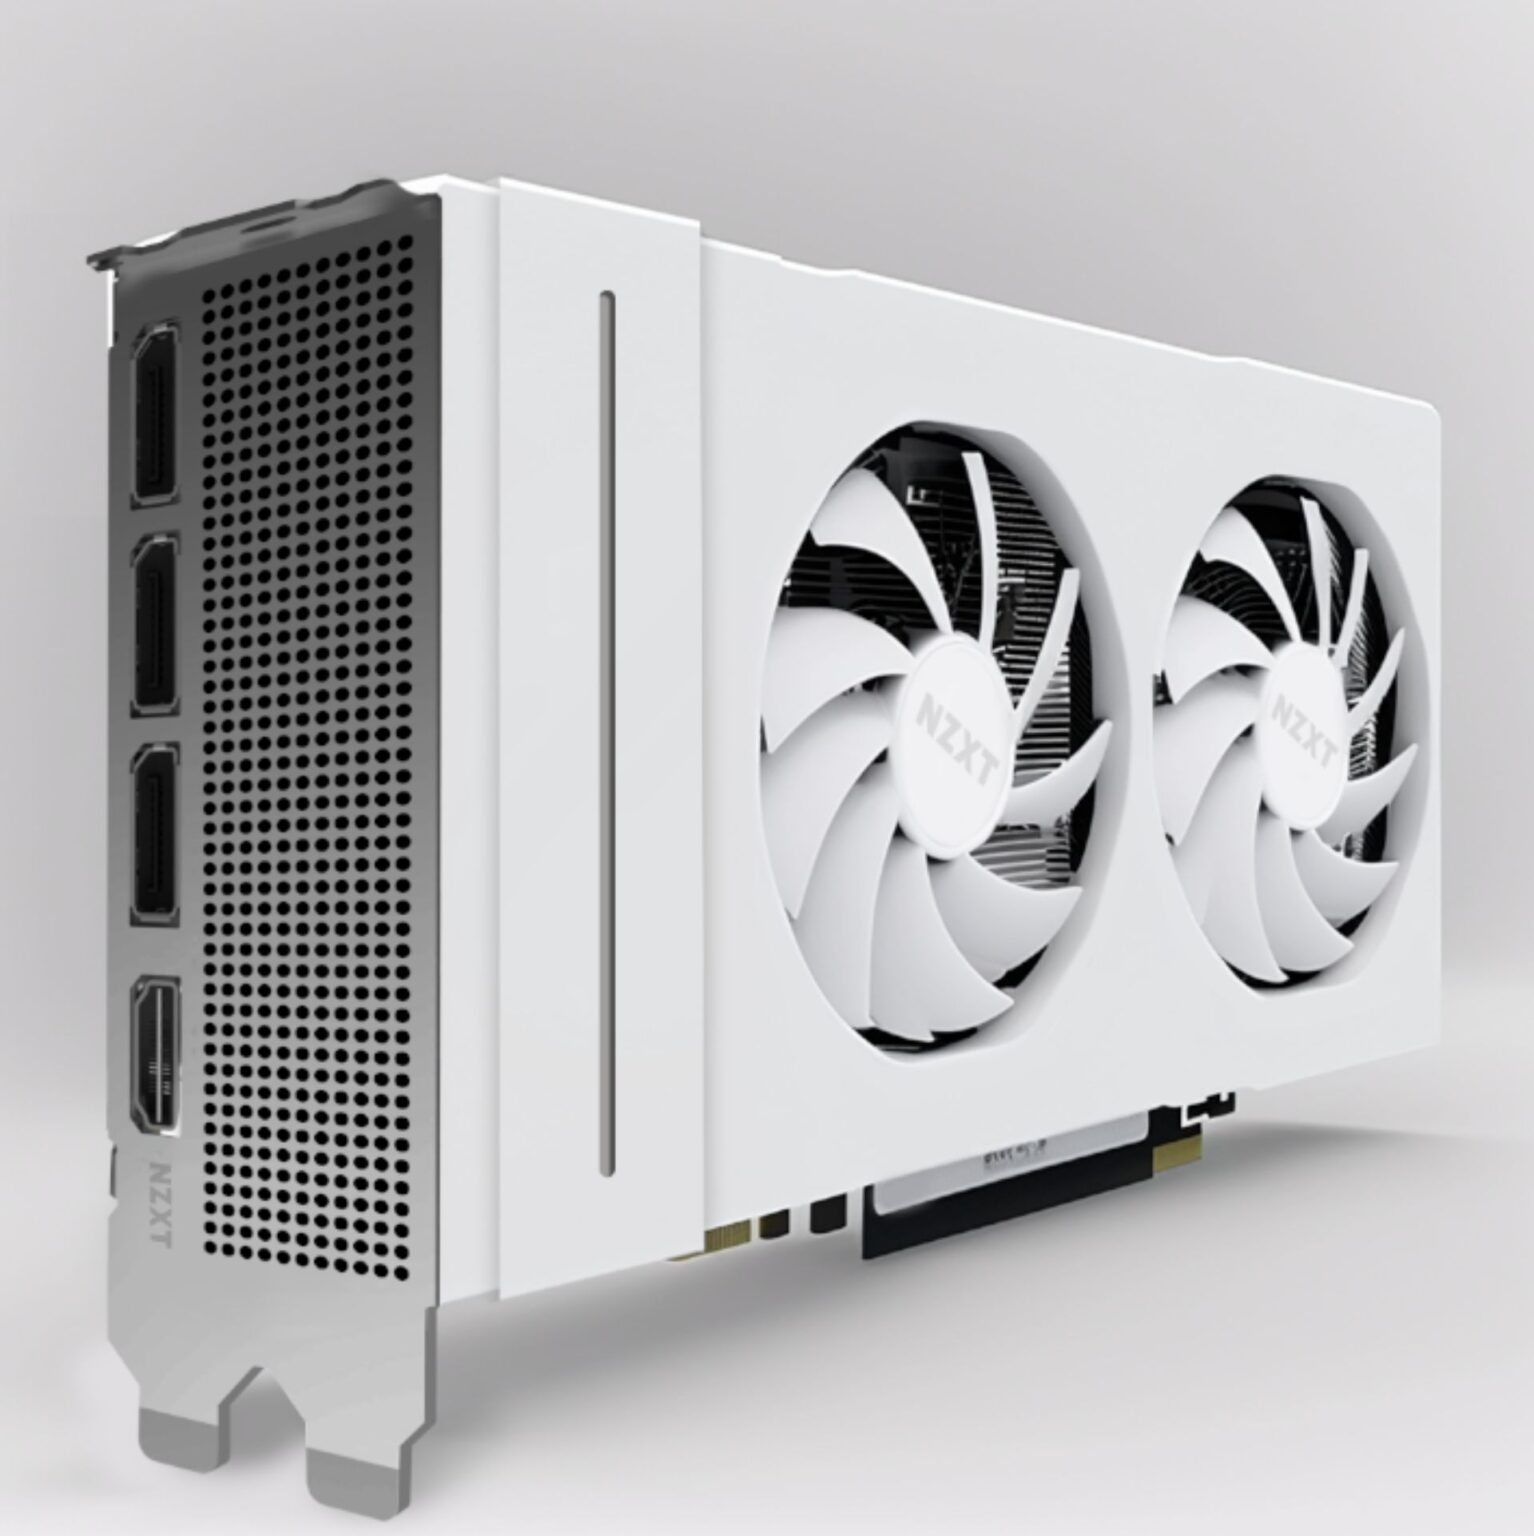 April 1st, NZXT GPU, AI Fans and Other Incredible Tech Innovations